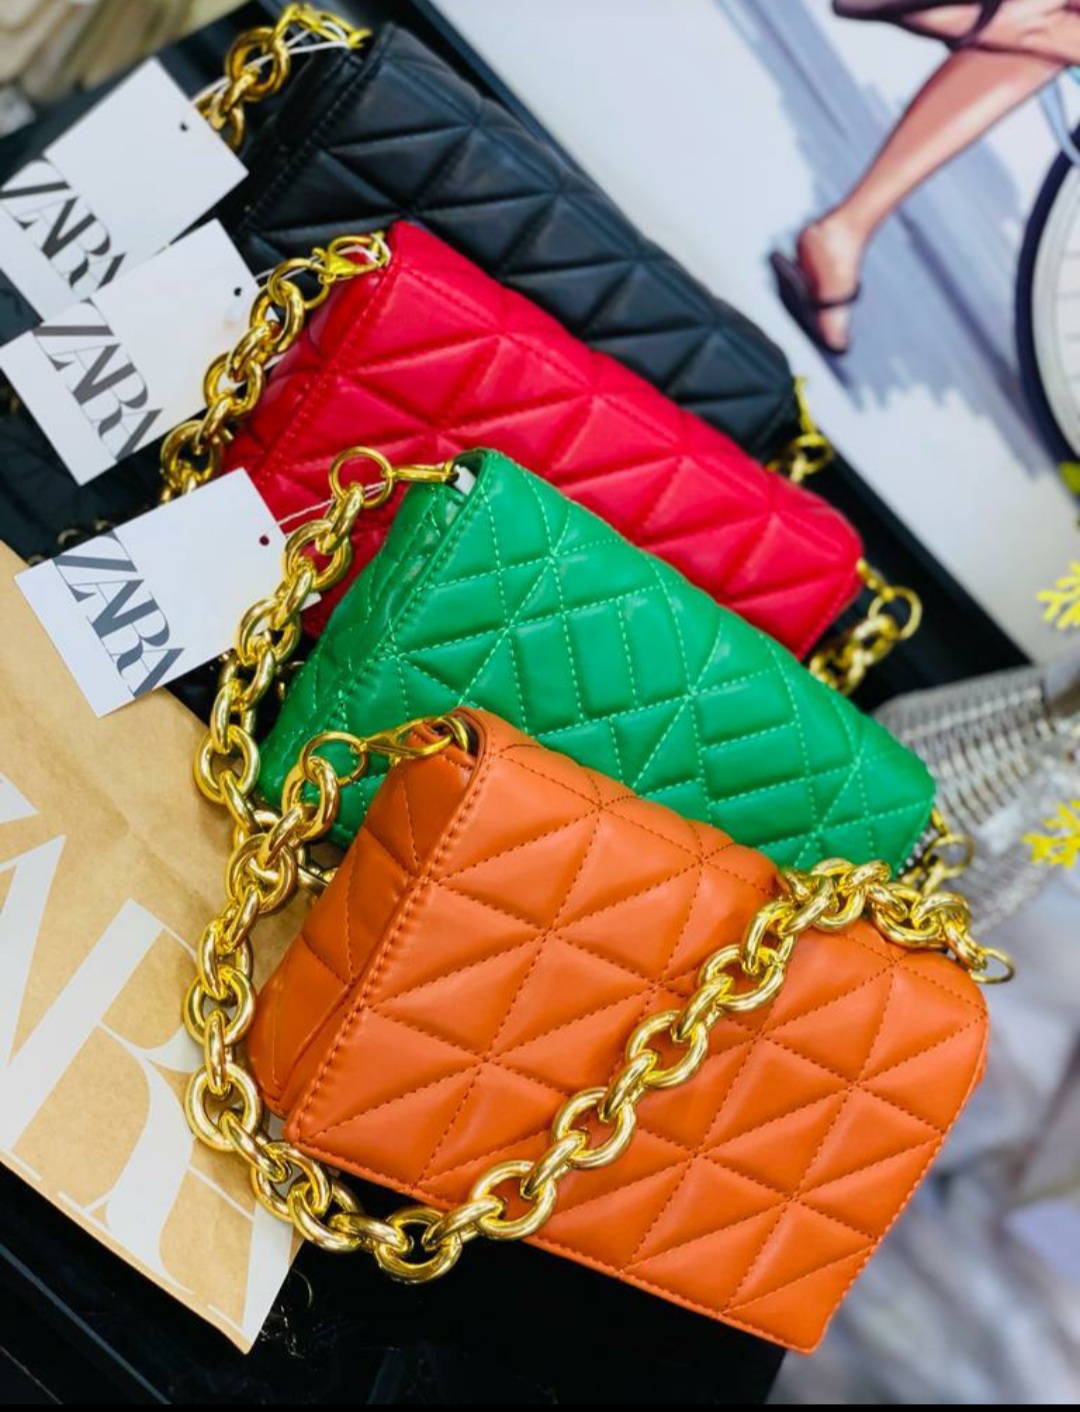 Sling bag available Price 3800 📞0714630159 | Instagram